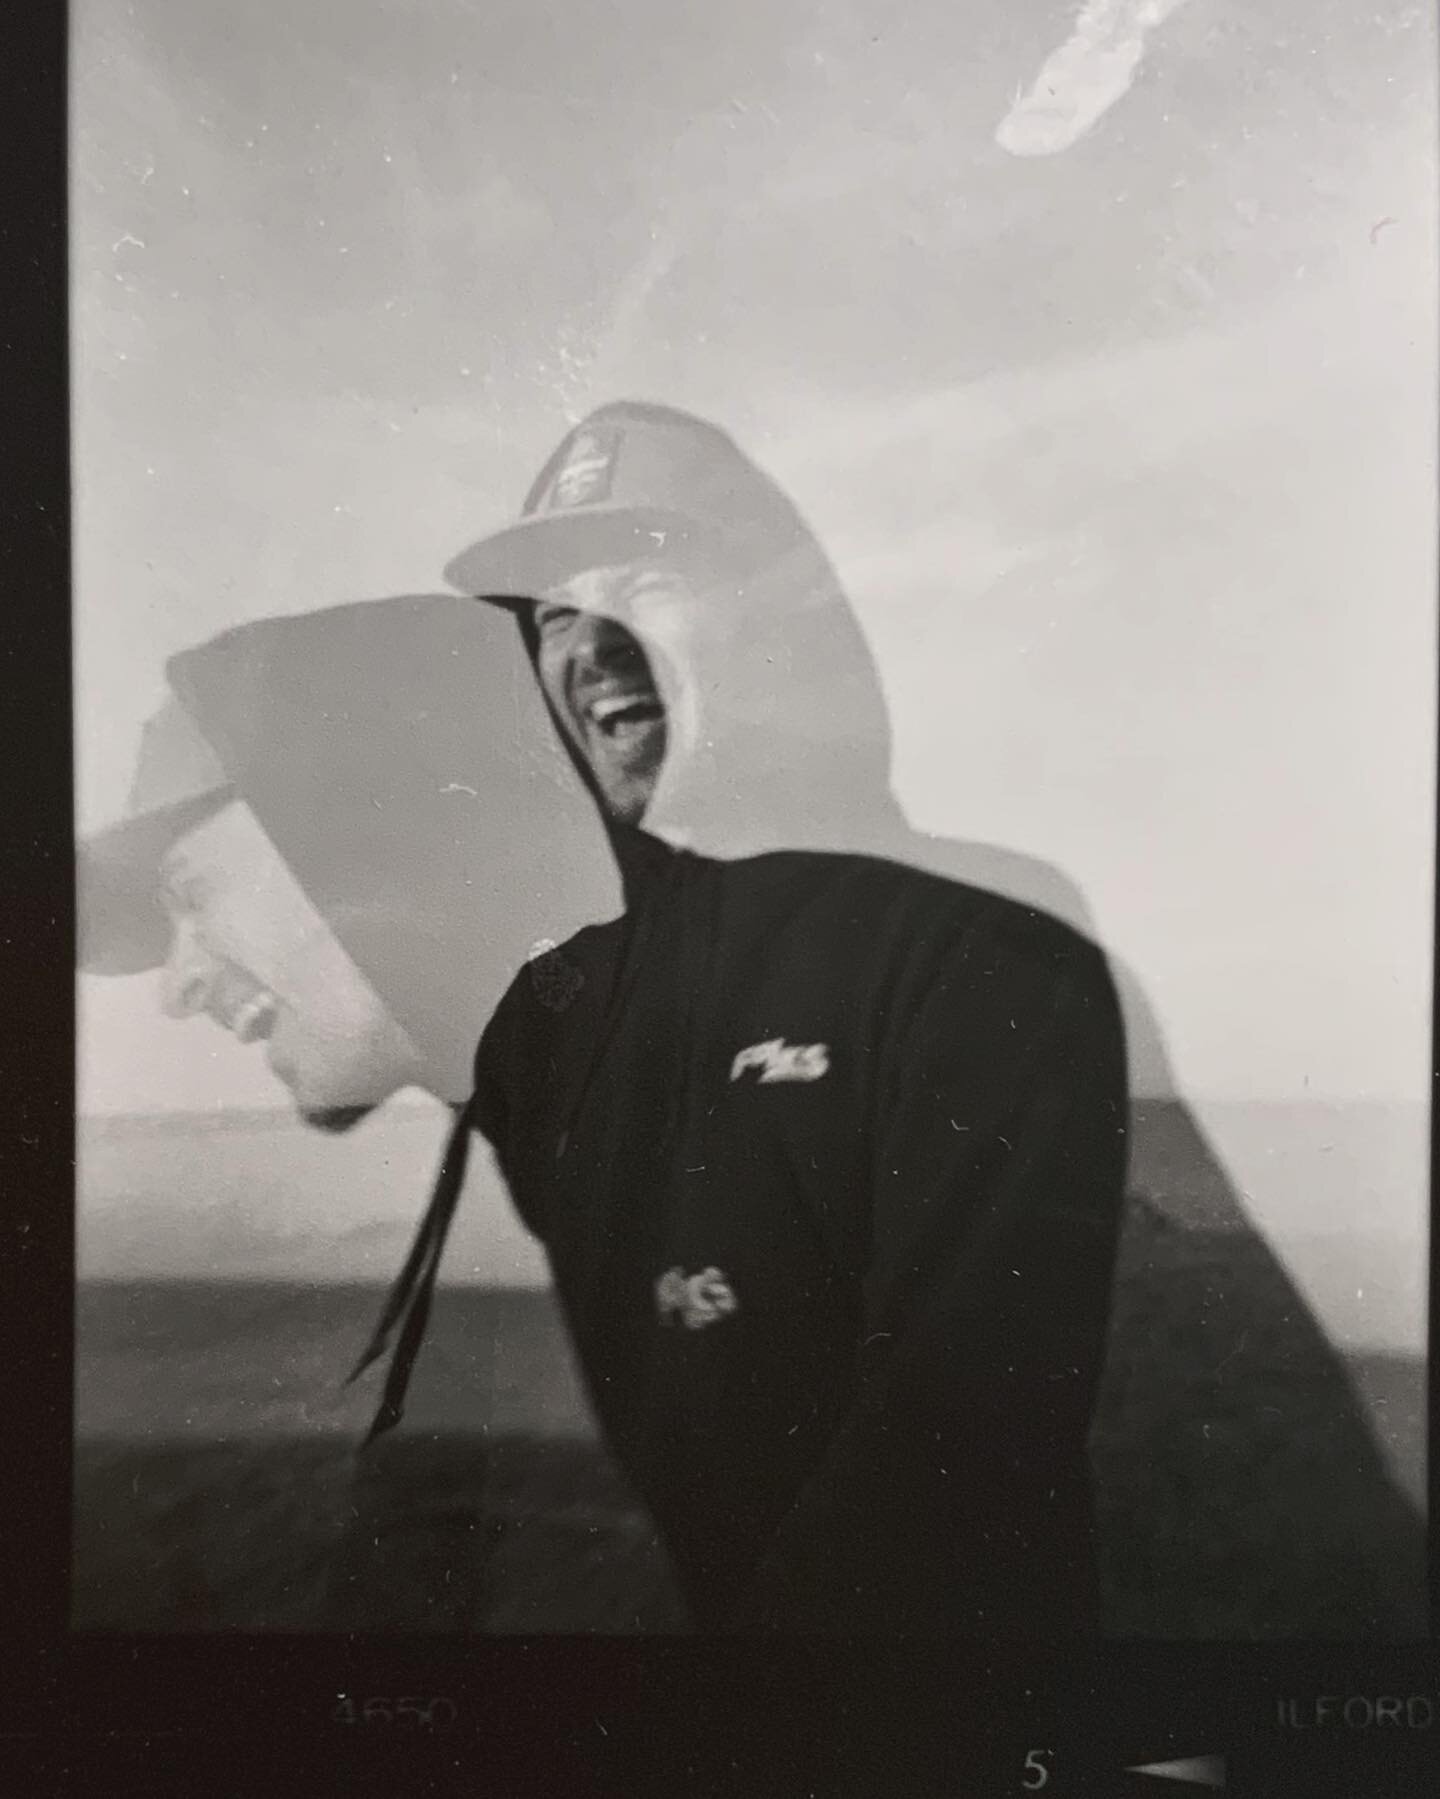 Conrad / shot on 35mm film with the Holga 120N, a simple little plastic camera I found in my mom&rsquo;s basement this summer - a welcome reminder to have some fun and never stop experimenting